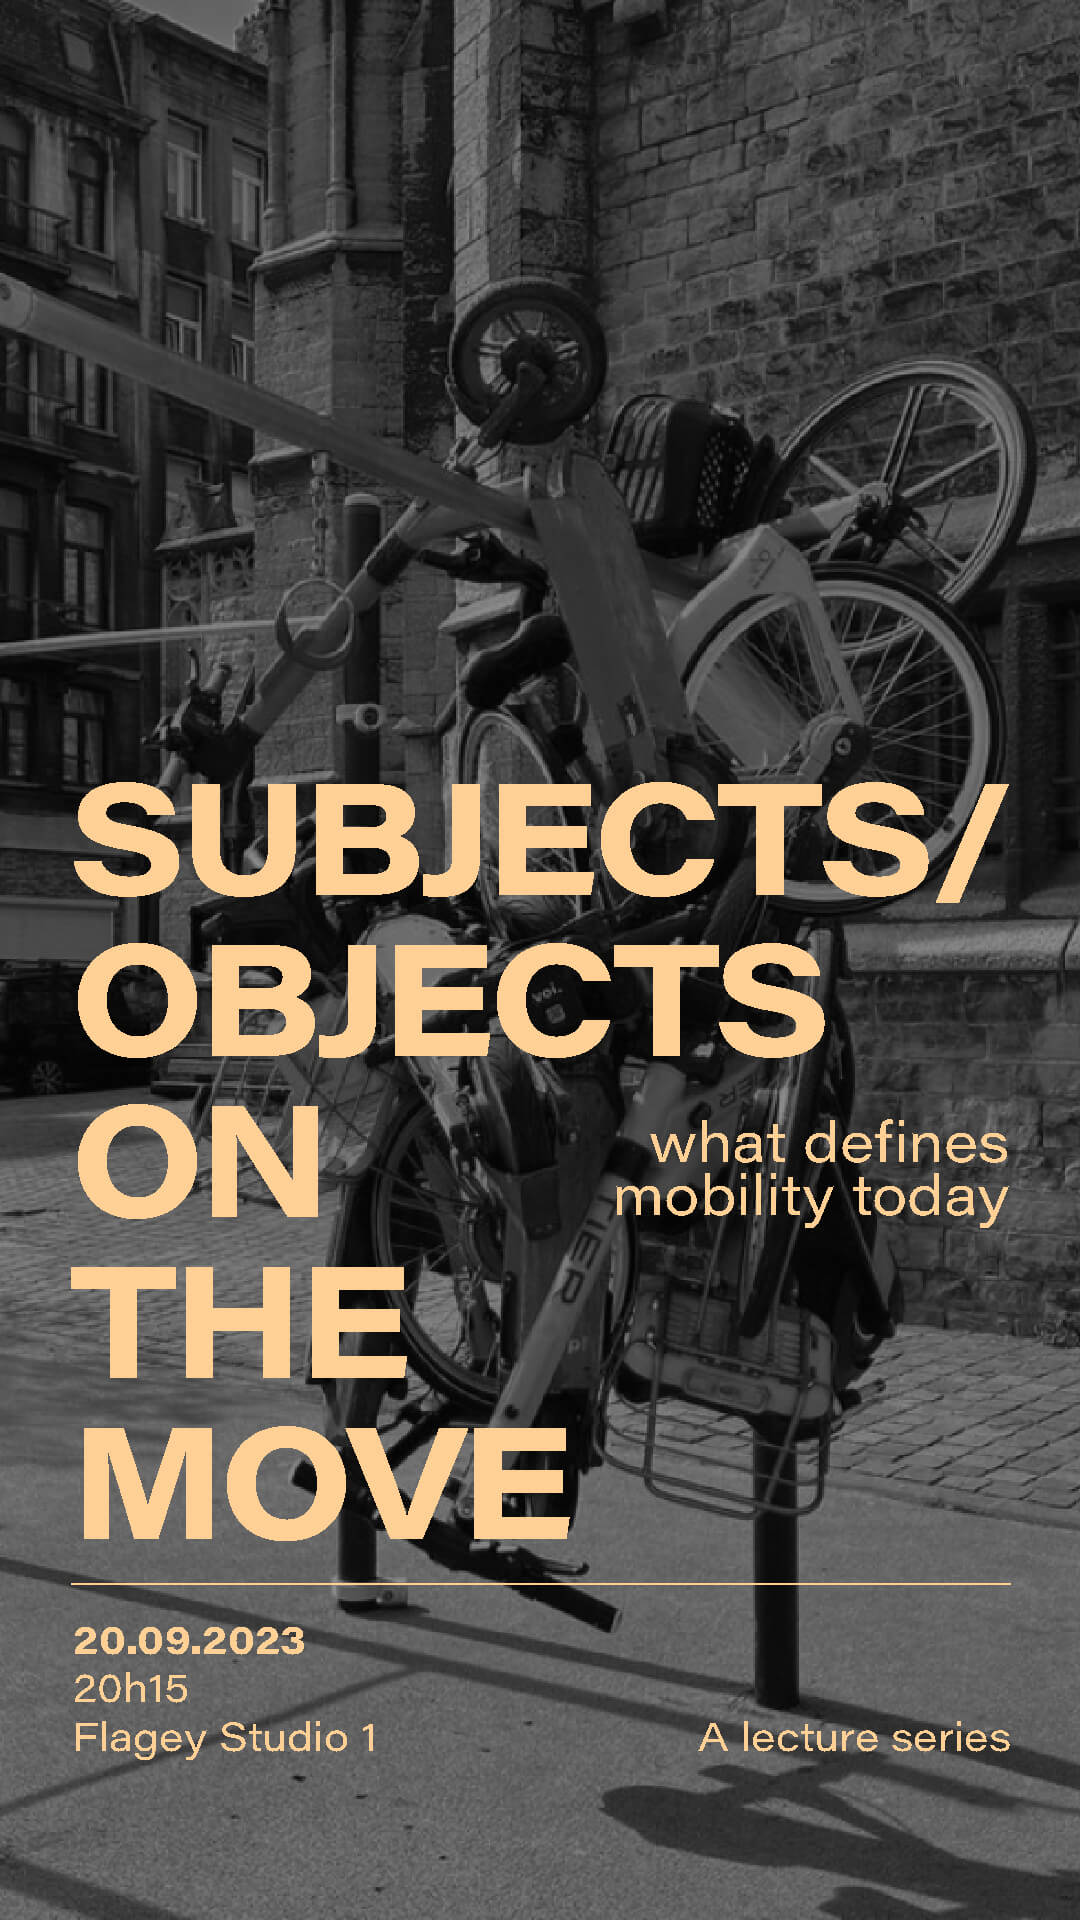 Subjects/objects on the move - What define mobility today by Studio Hier (FR/EN)